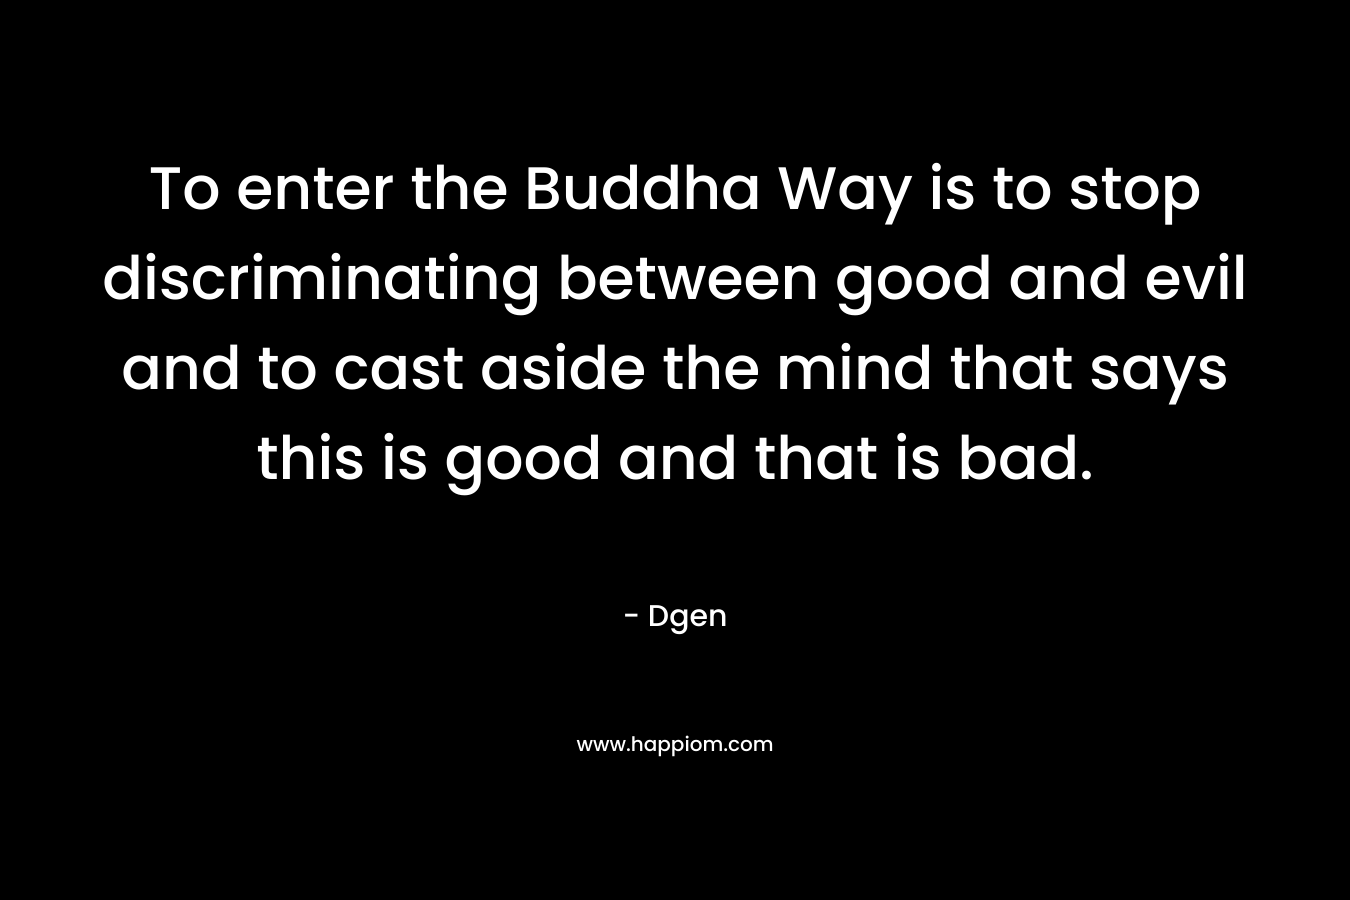 To enter the Buddha Way is to stop discriminating between good and evil and to cast aside the mind that says this is good and that is bad. – Dgen